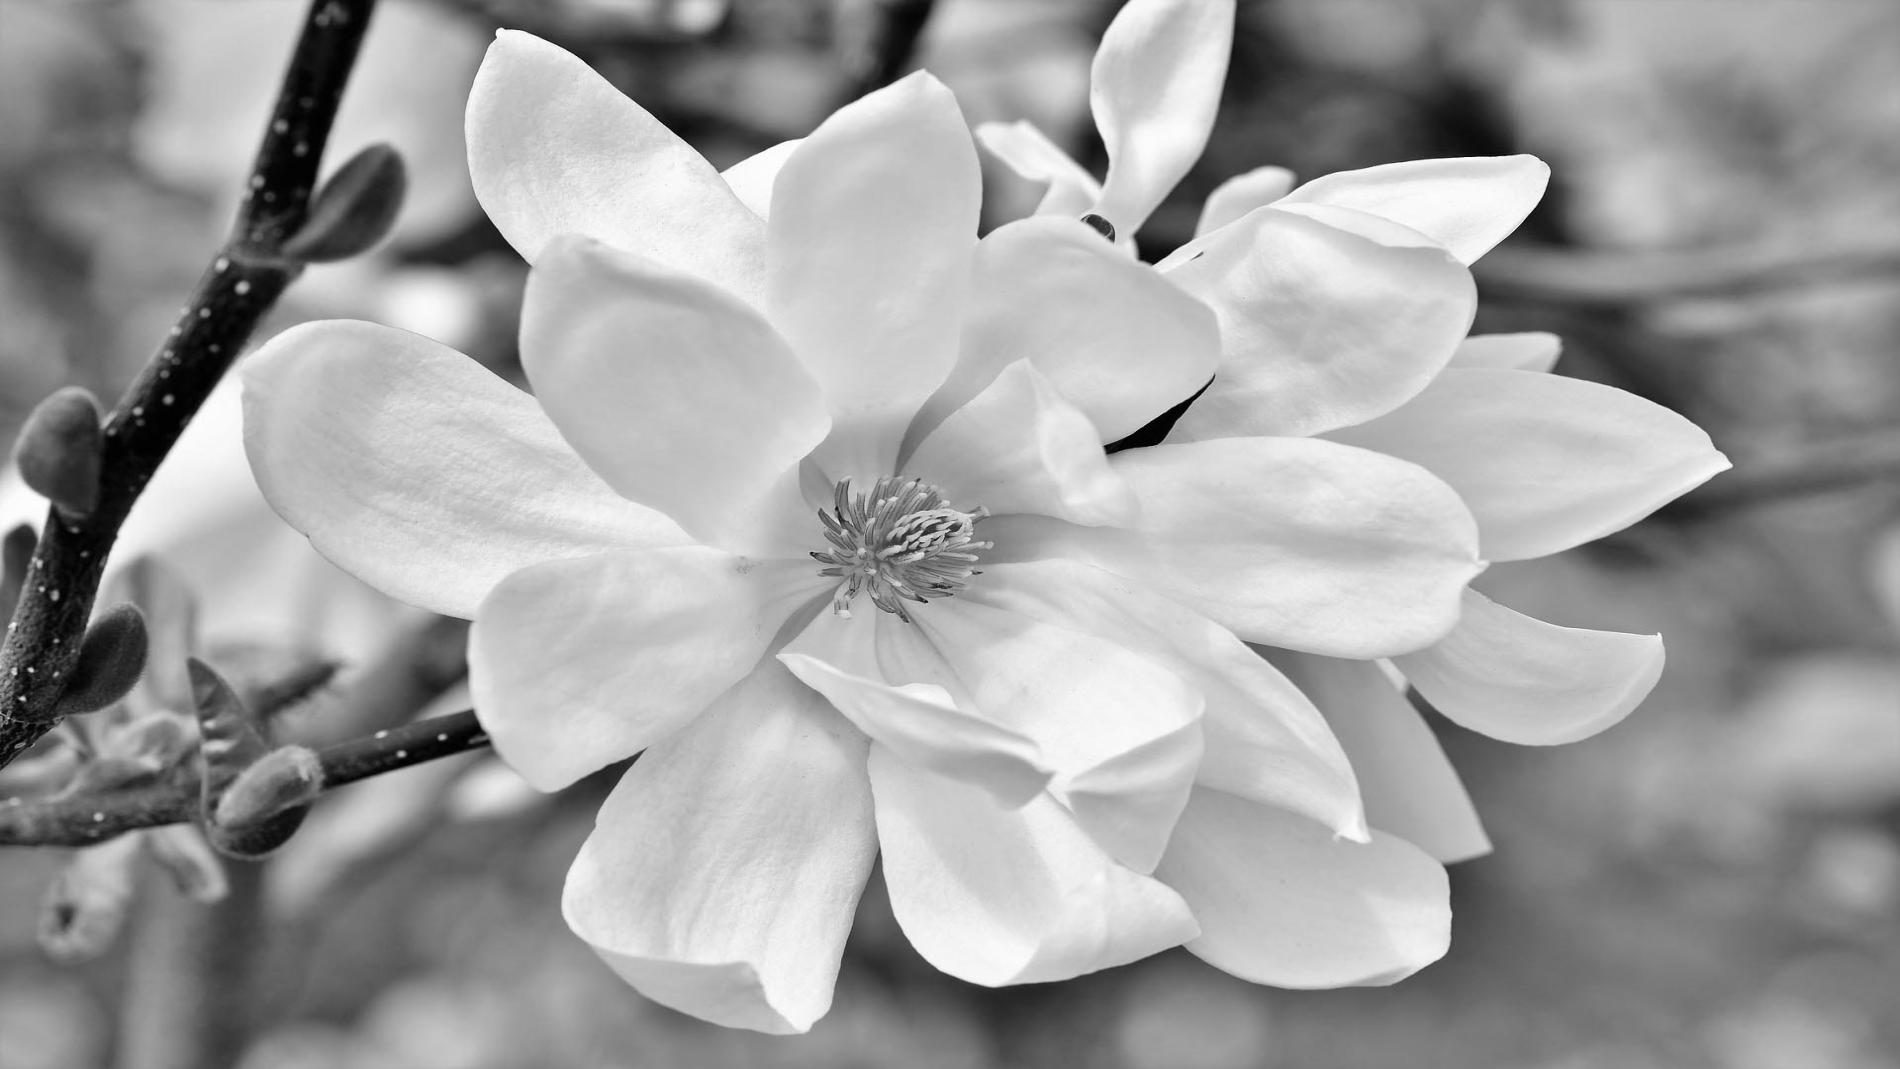 black and white image of a magnolia flower